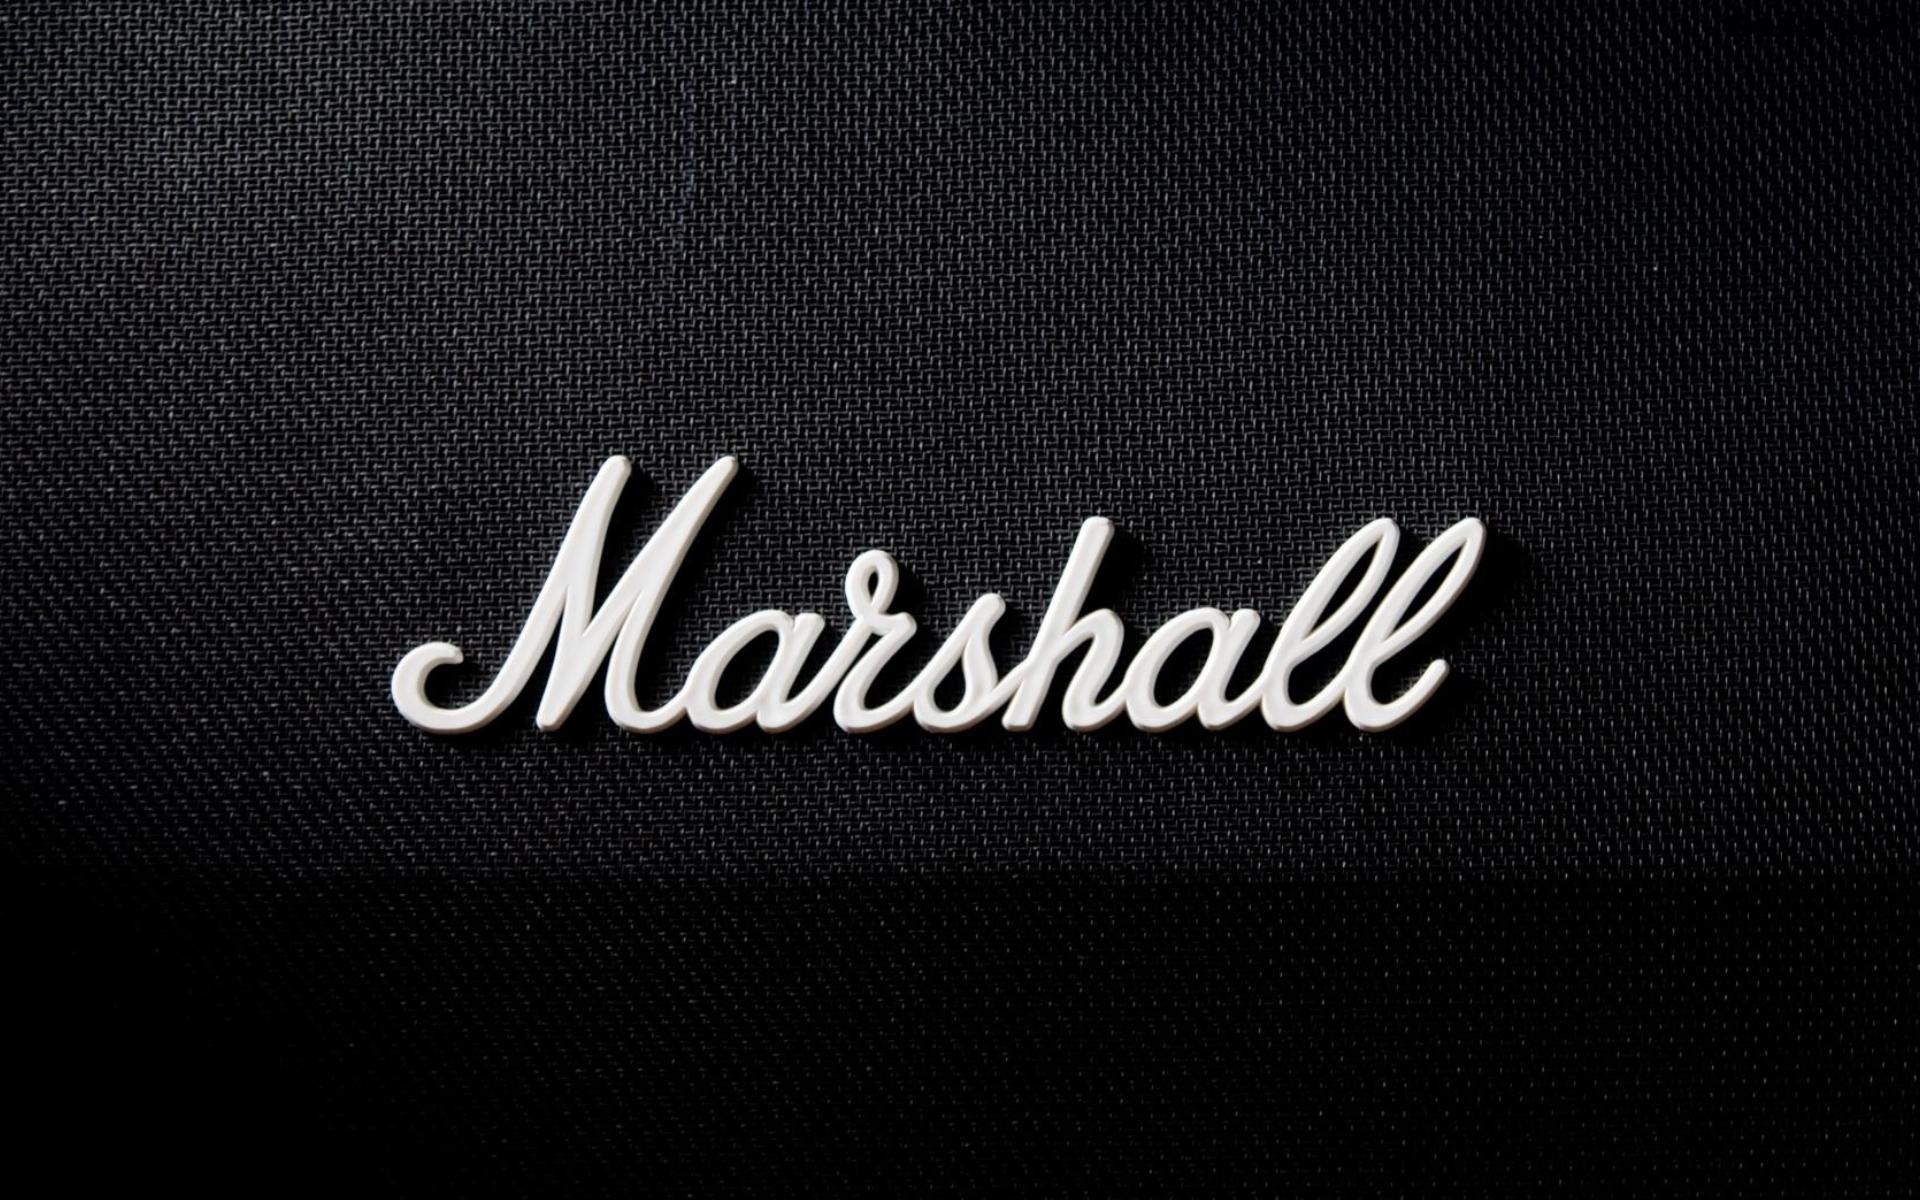 1 Marshall Hd Wallpapers Backgrounds Wallpaper Abyss Afalchi Free images wallpape [afalchi.blogspot.com]